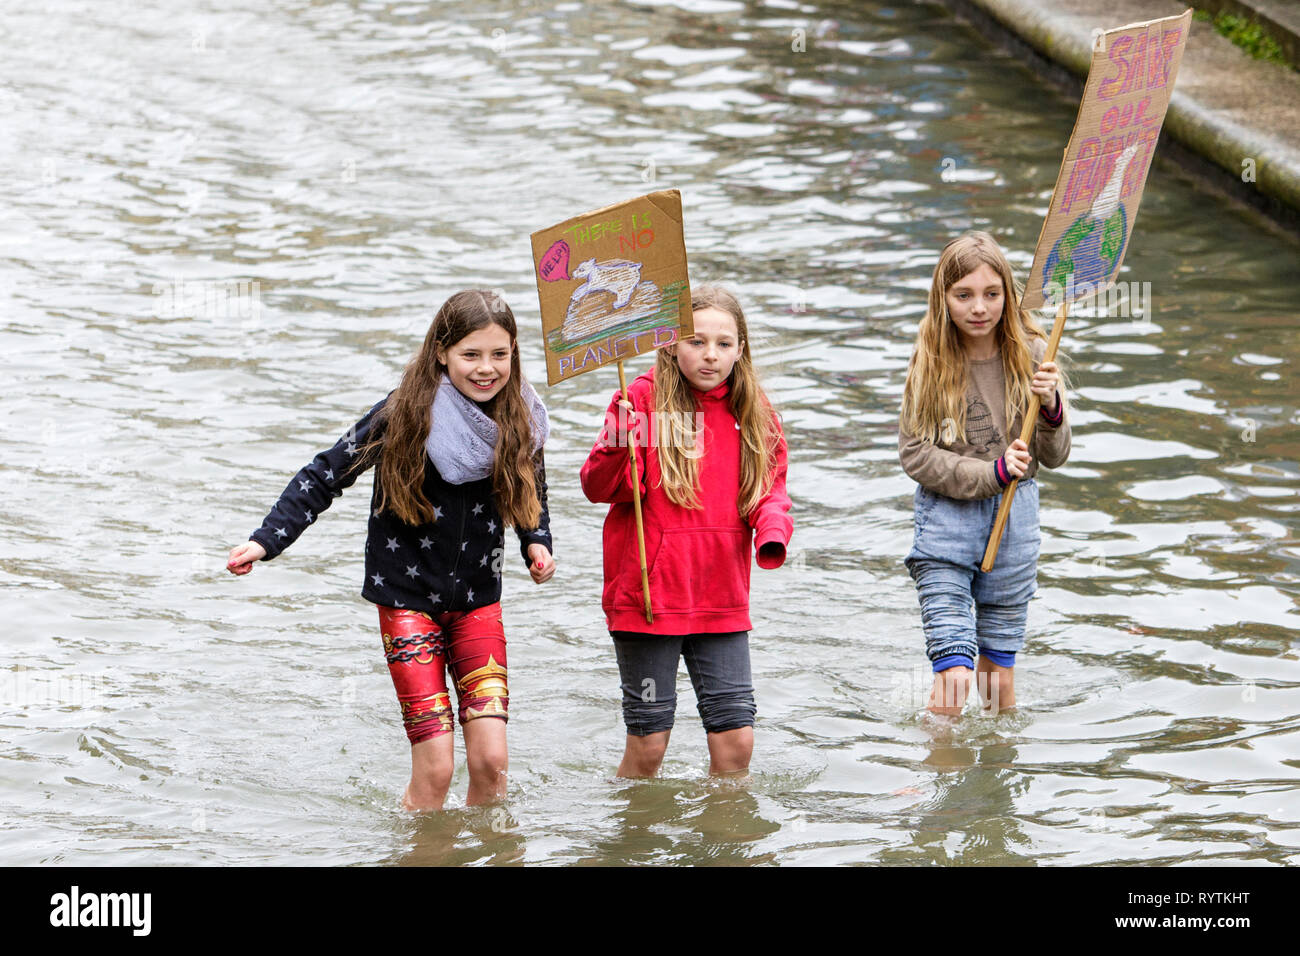 Bristol, UK. 15th March, 2019. Bristol college students and school children carrying climate change placards and signs are pictured standing in the moat outside Bristol City Hall as they protest against Climate change. The pupils who also went on strike last month walked out of school again today as part of a countrywide coordinated strike action to force action on climate change policy. Credit: lynchpics/Alamy Live News Stock Photo